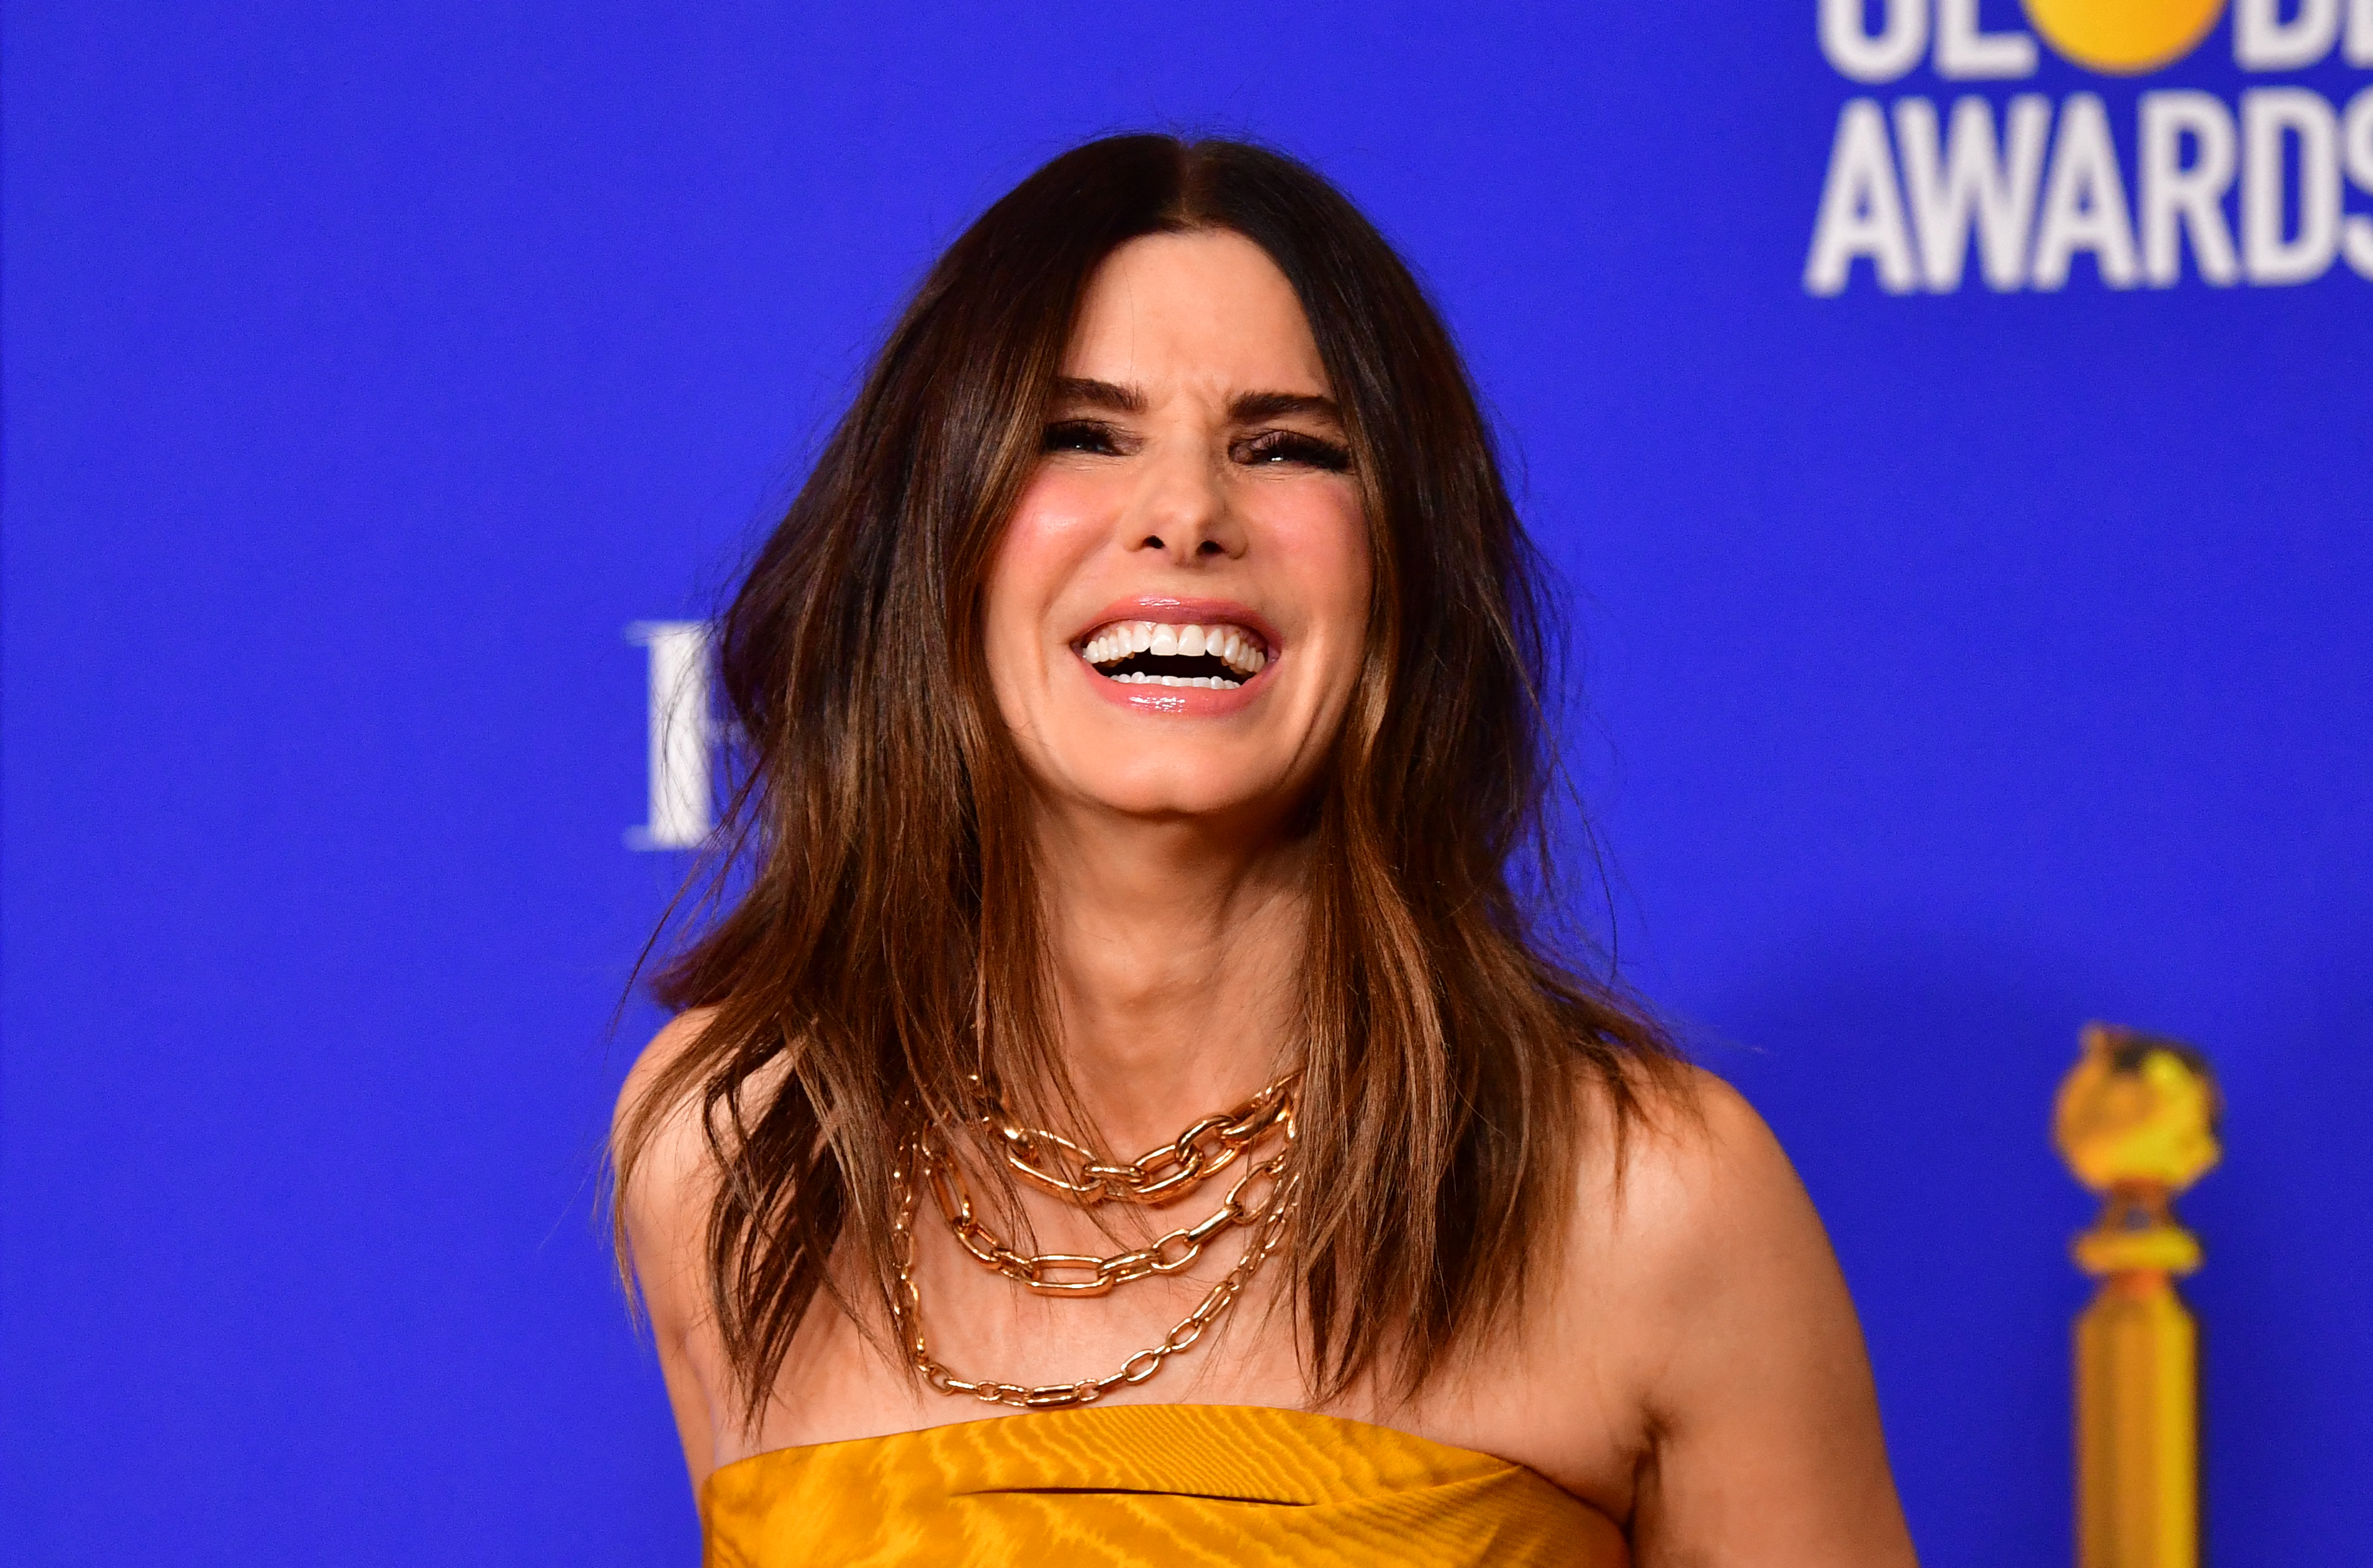 Sandra Bullock poses in the press room during the 77th annual Golden Globe Awards in Beverly Hills, California, on January 5, 2020. | Source: Getty Images